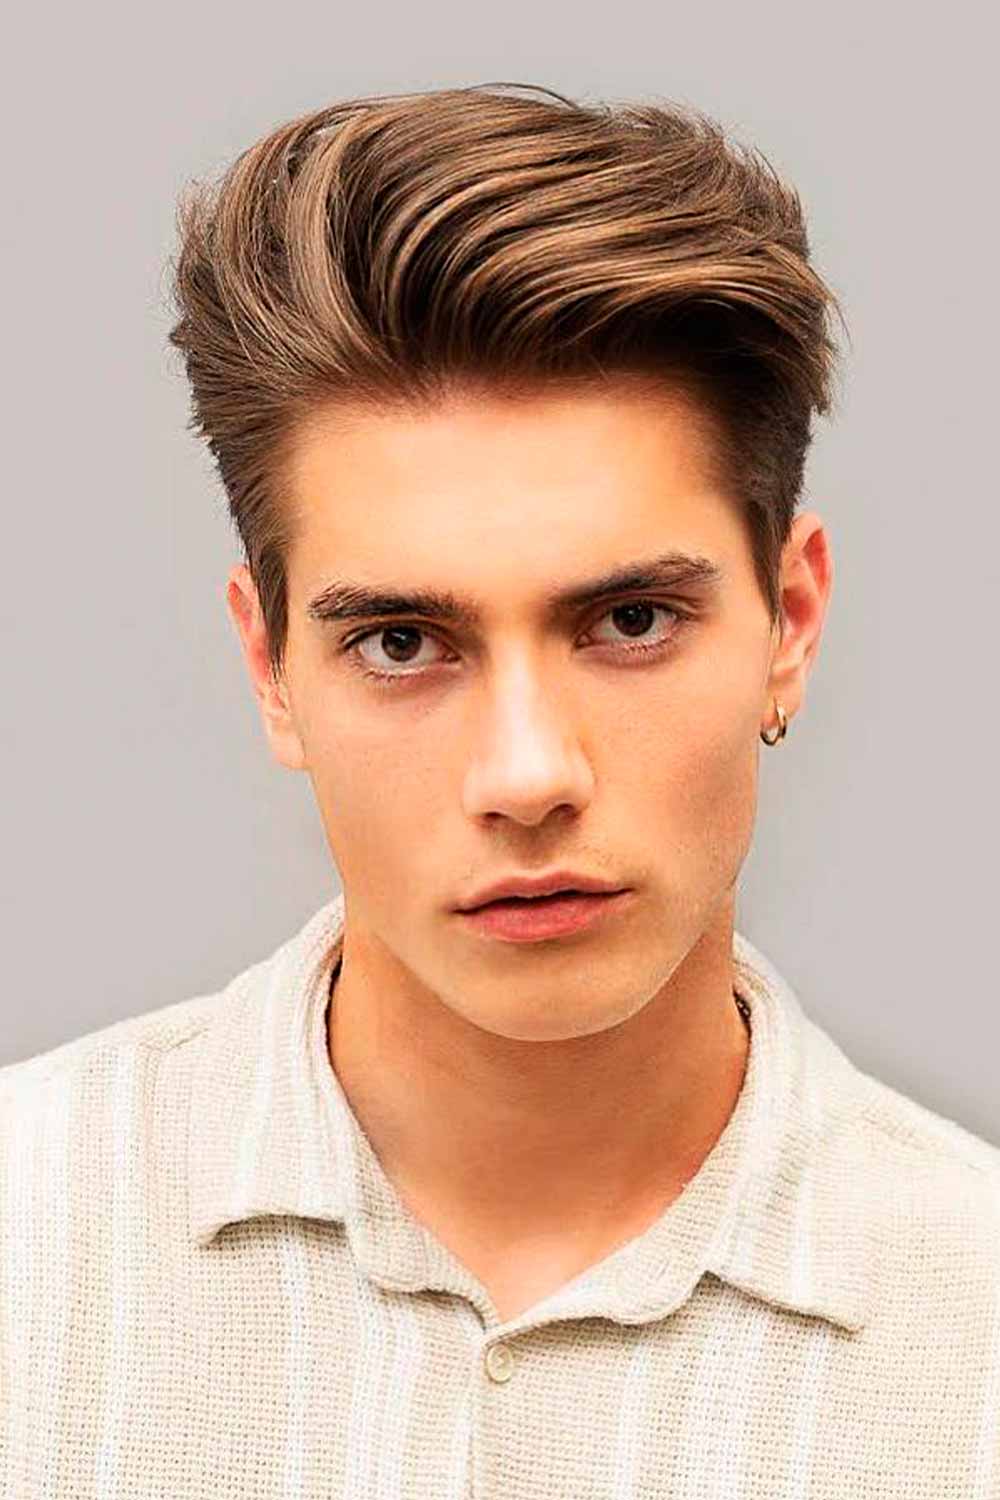 16 Men's Hairstyle for Thick Hair To Look Handsome – Hottest Haircuts